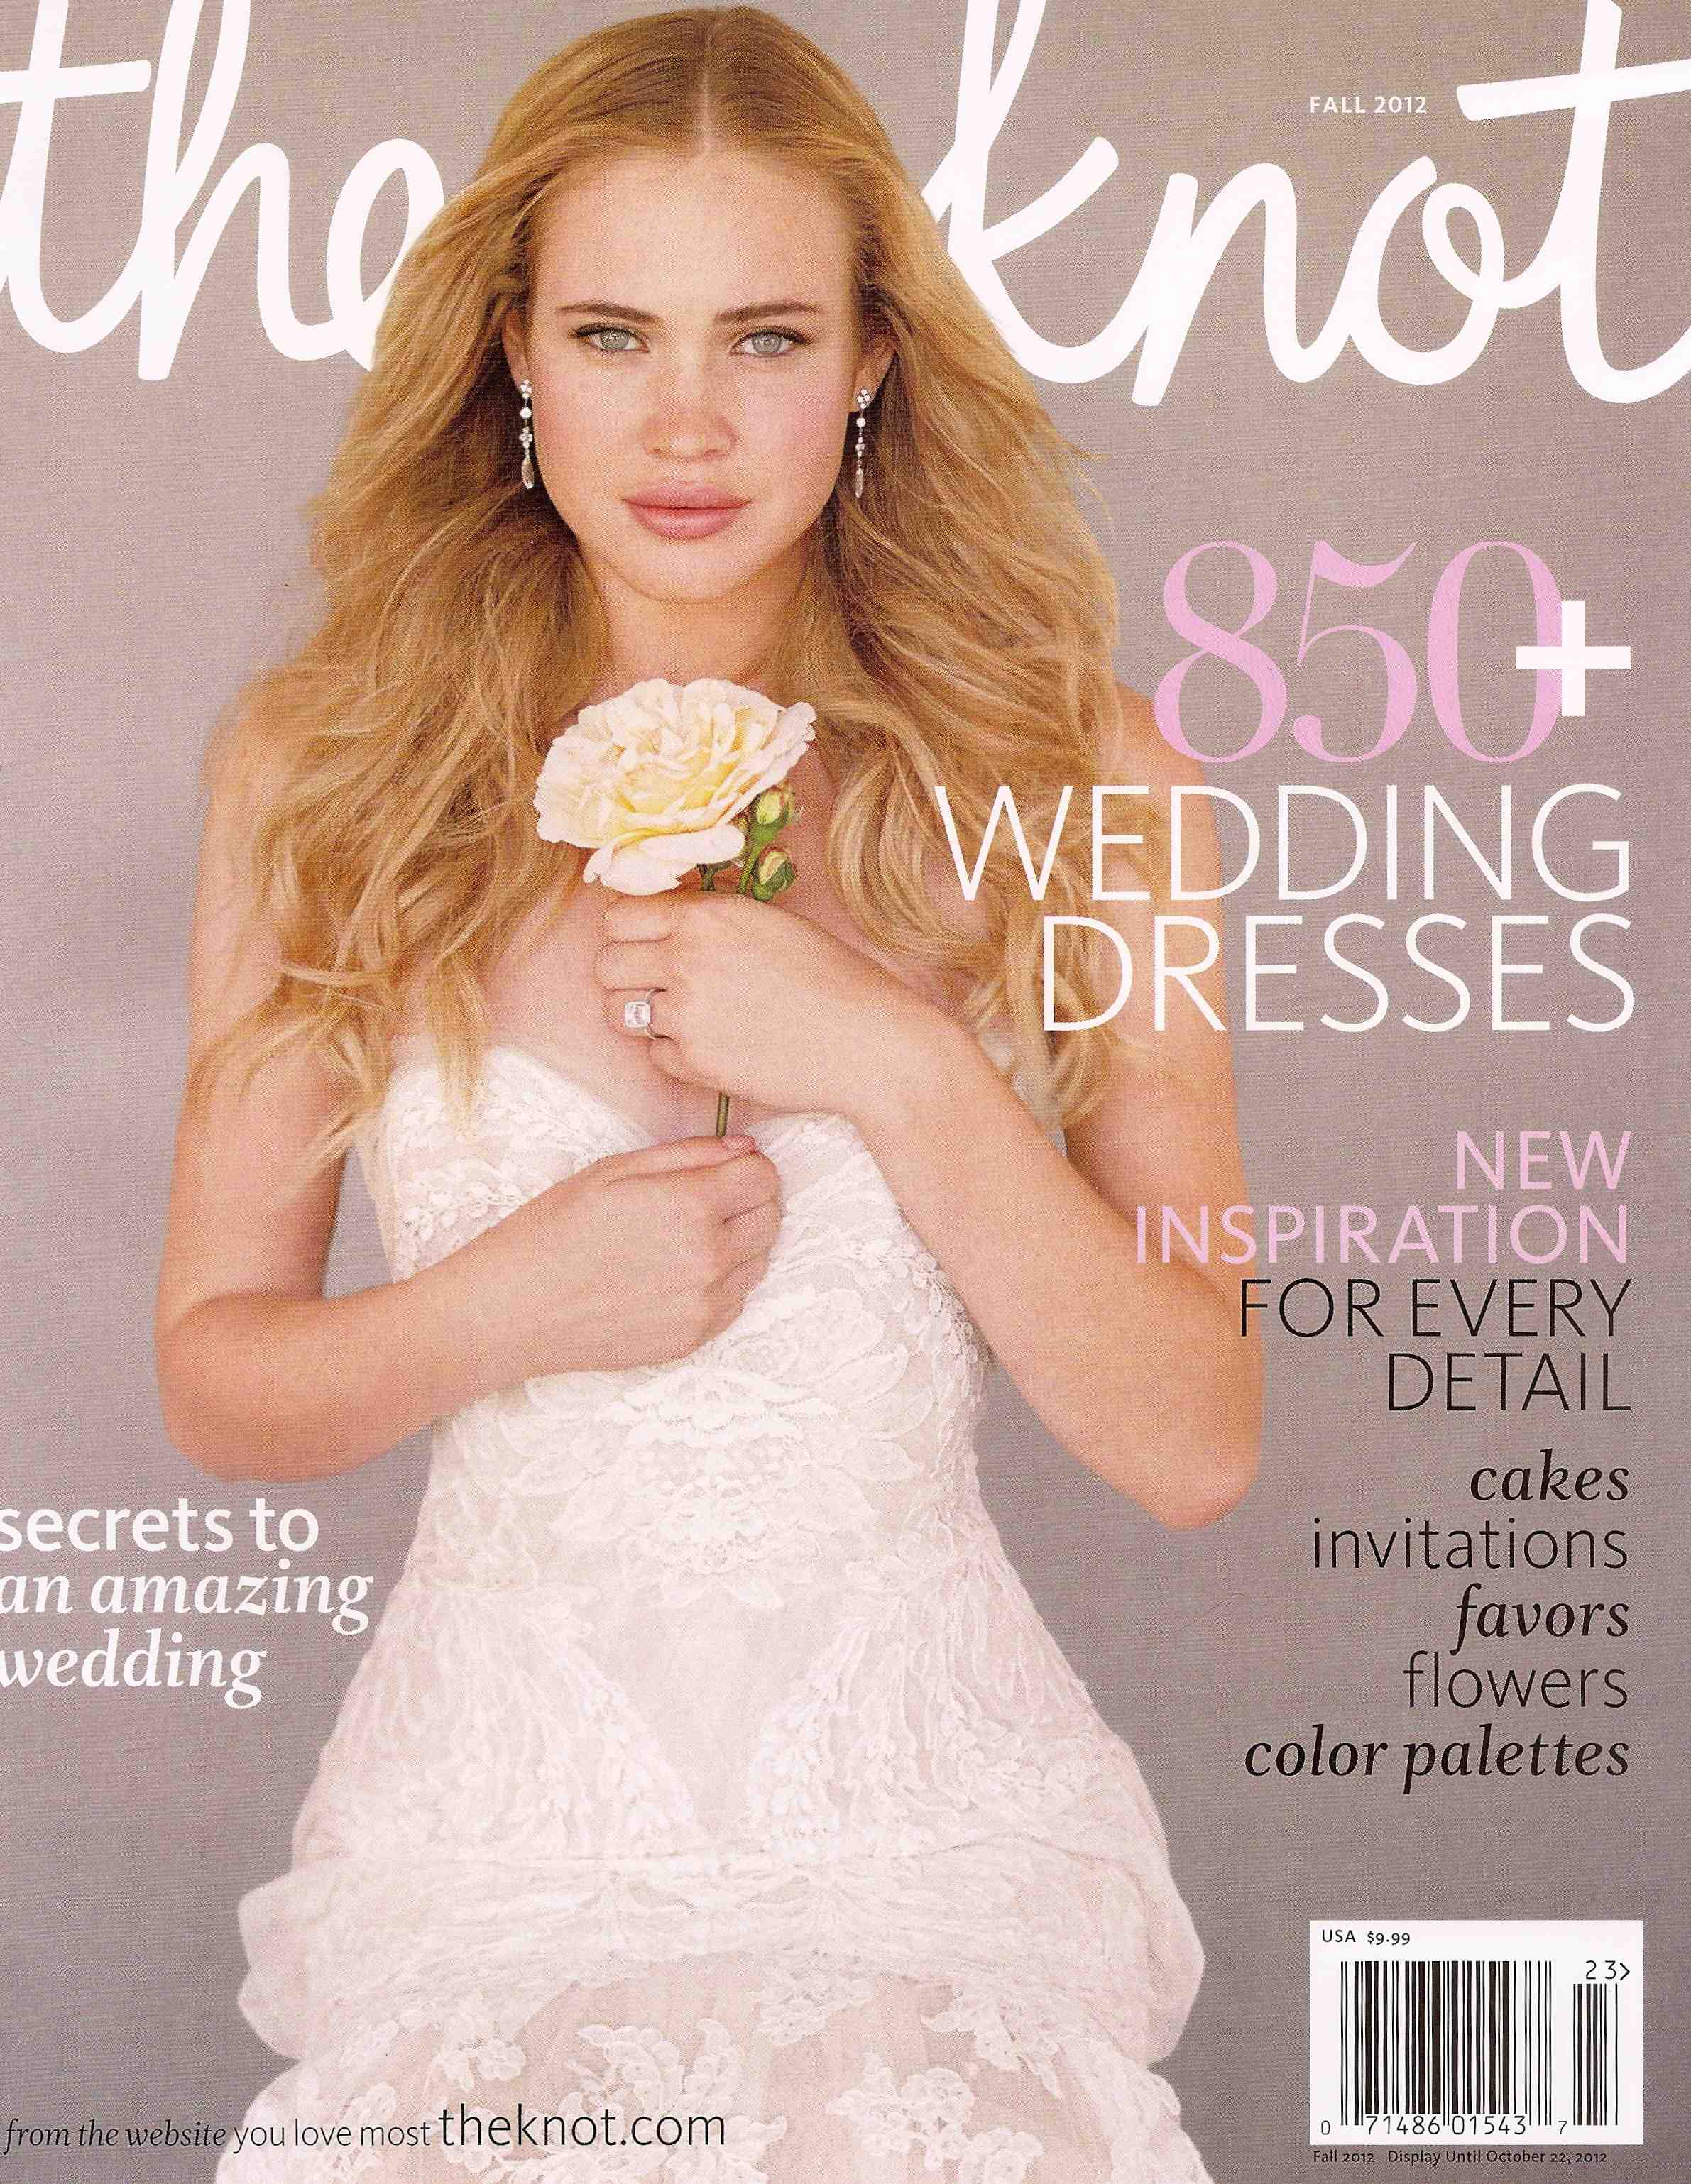 The Knot Fall 2012 Cover.jpg